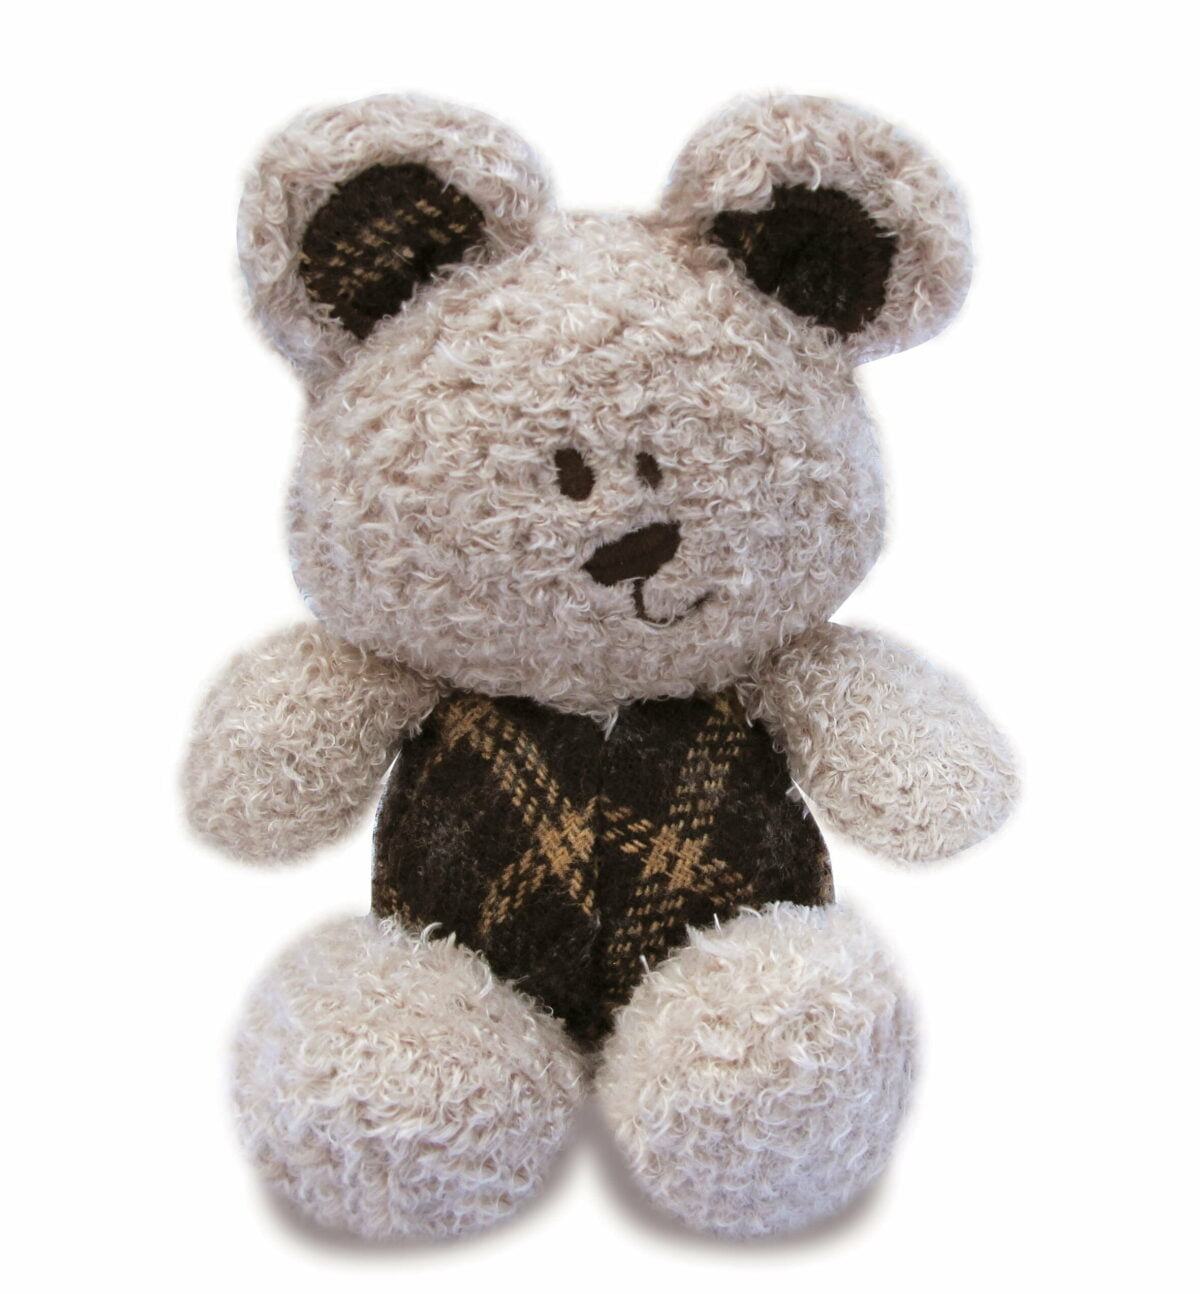 Little Ted Bear cut out image